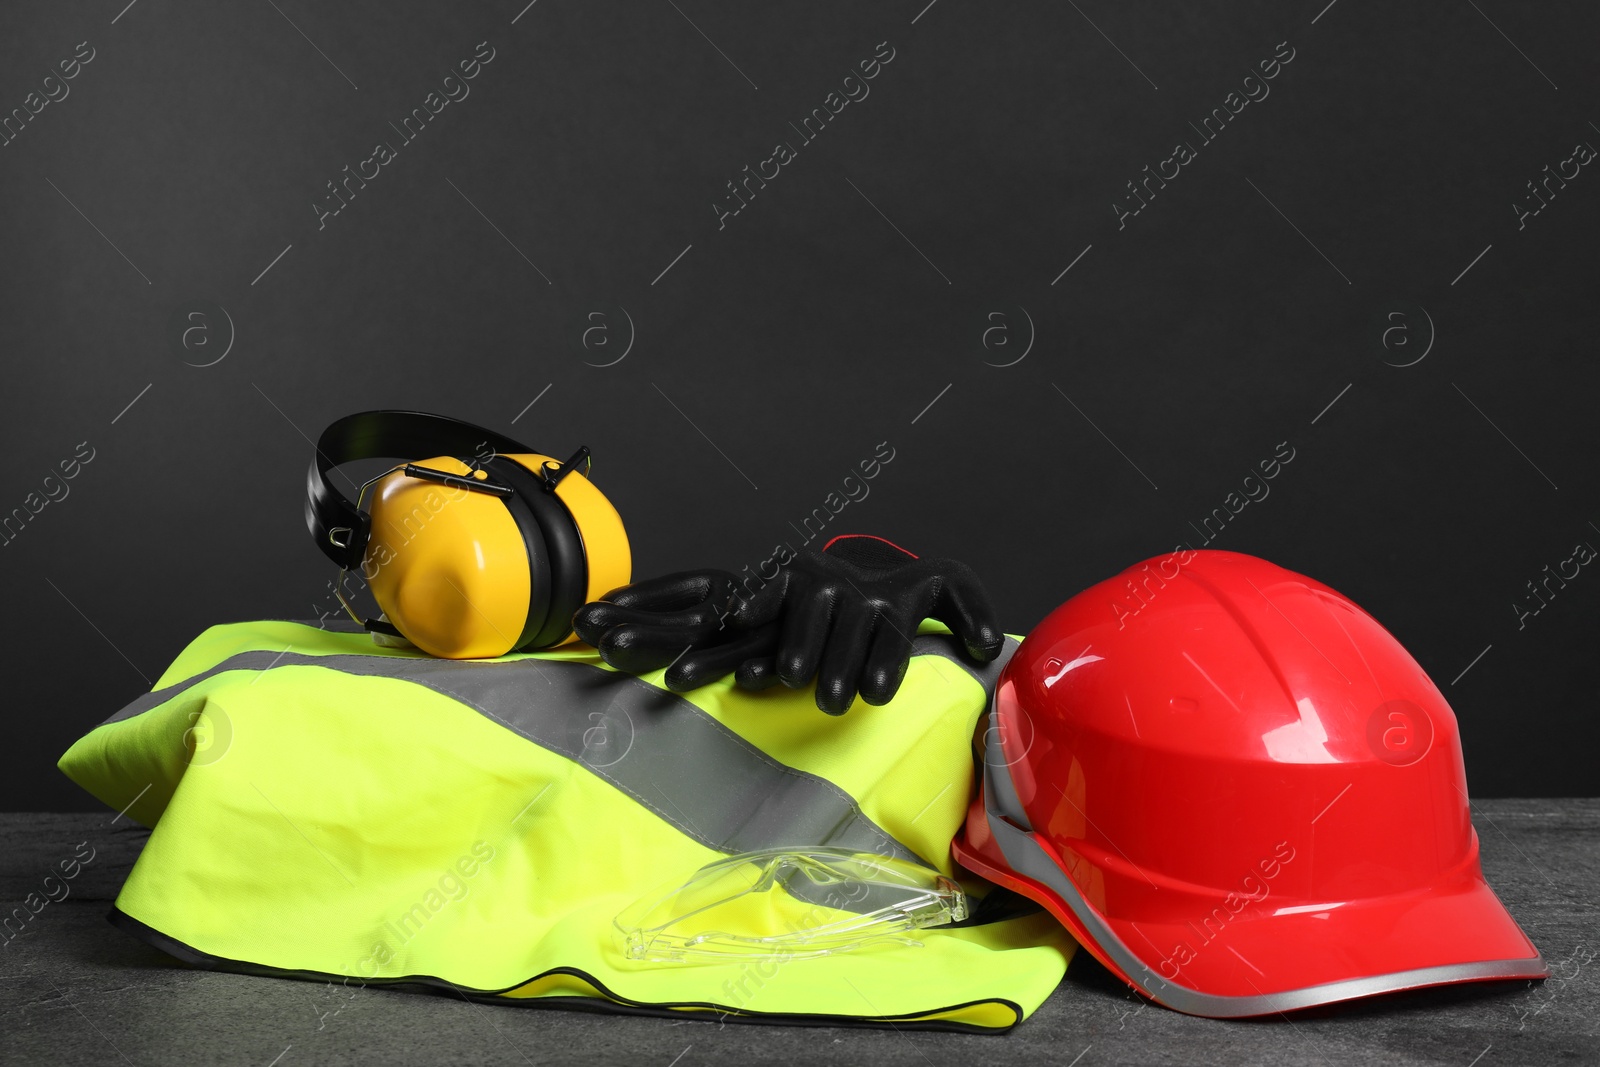 Photo of Reflective vest, hard hat, earmuffs, protective gloves and goggles on gray surface, space for text